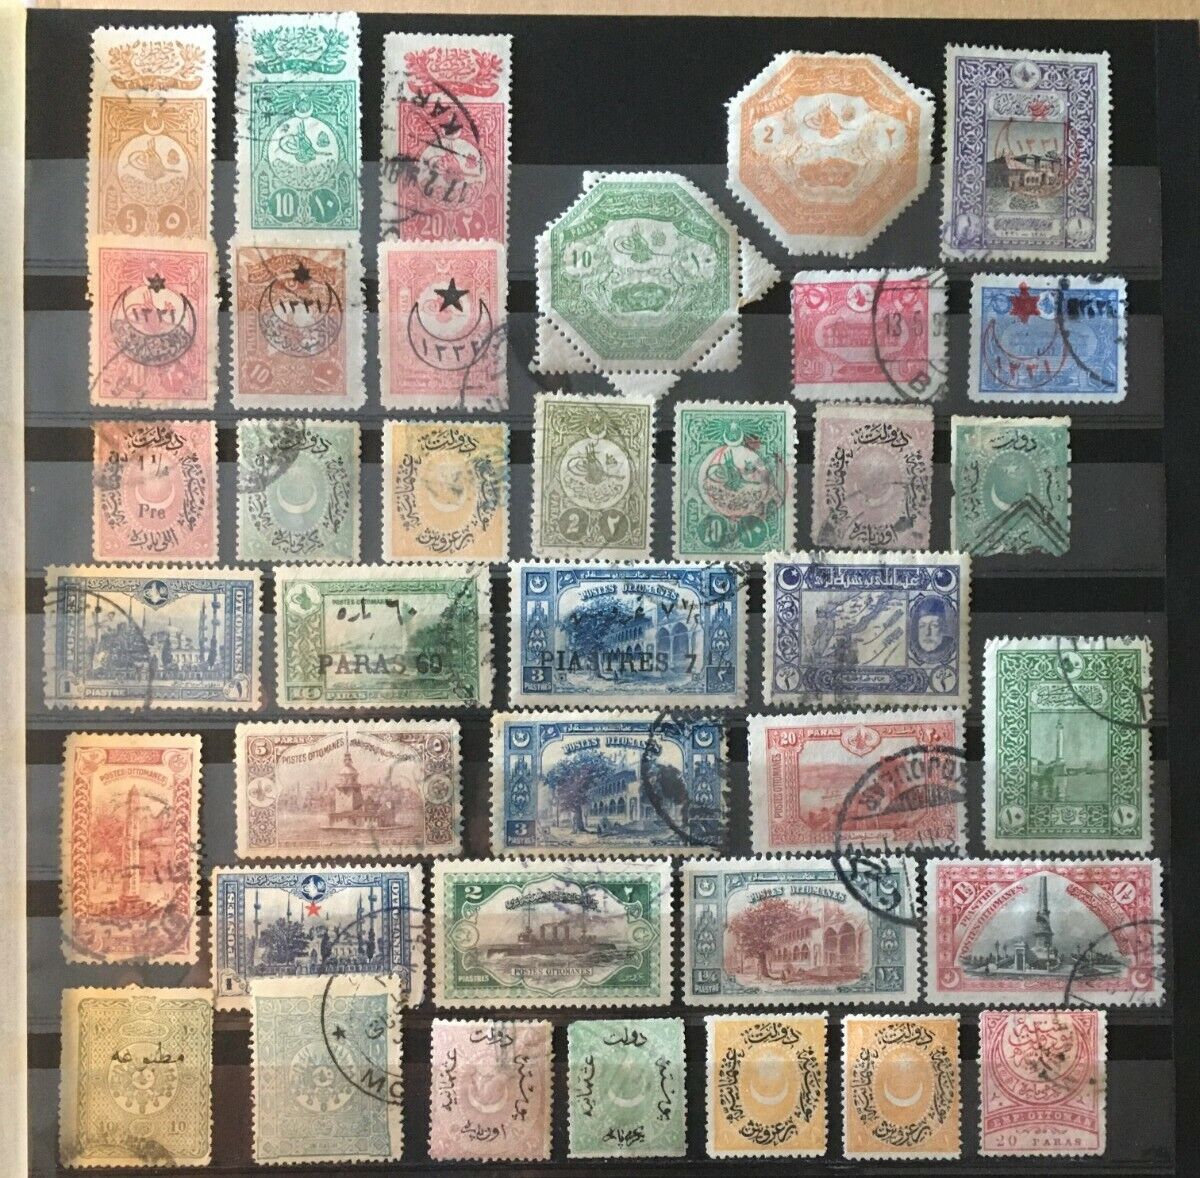 Turkey-1875-1921 Small Collection of 38 全商品オープニング価格 stamps mixed 最新最全の VF and Mint F USed